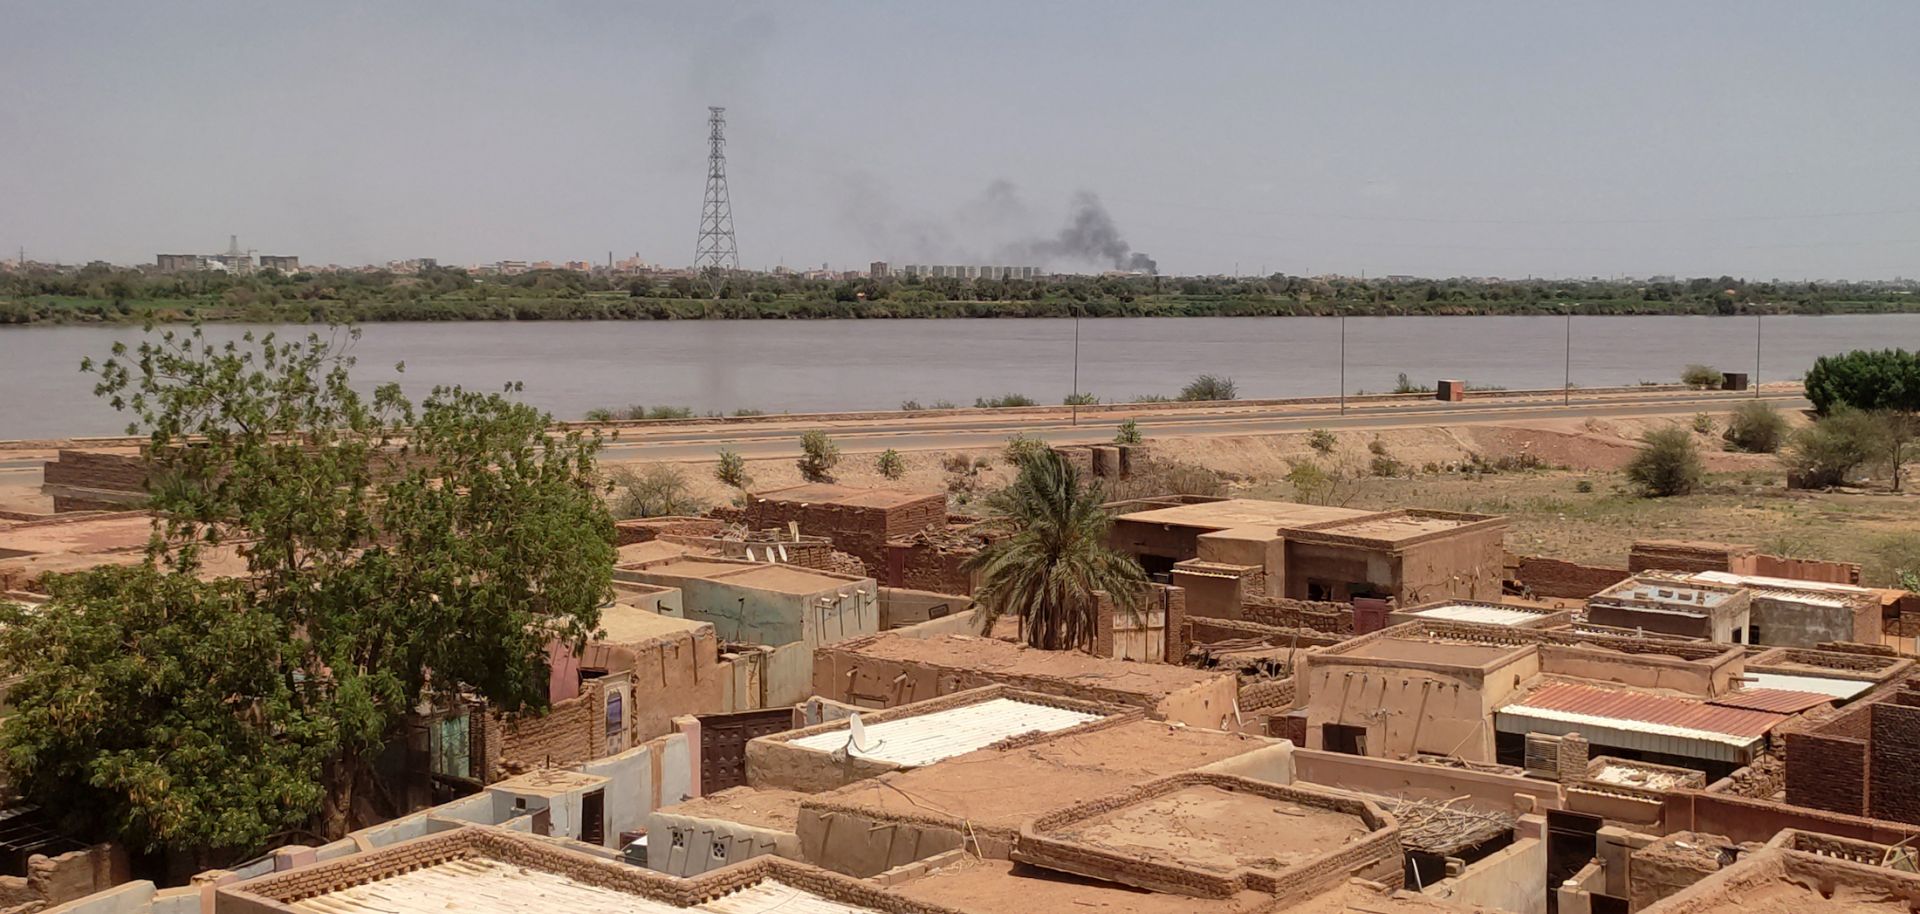 Smoke billows north of the Khartoum Bahri district on July 17, 2023, as fighting continues in war-torn Sudan.